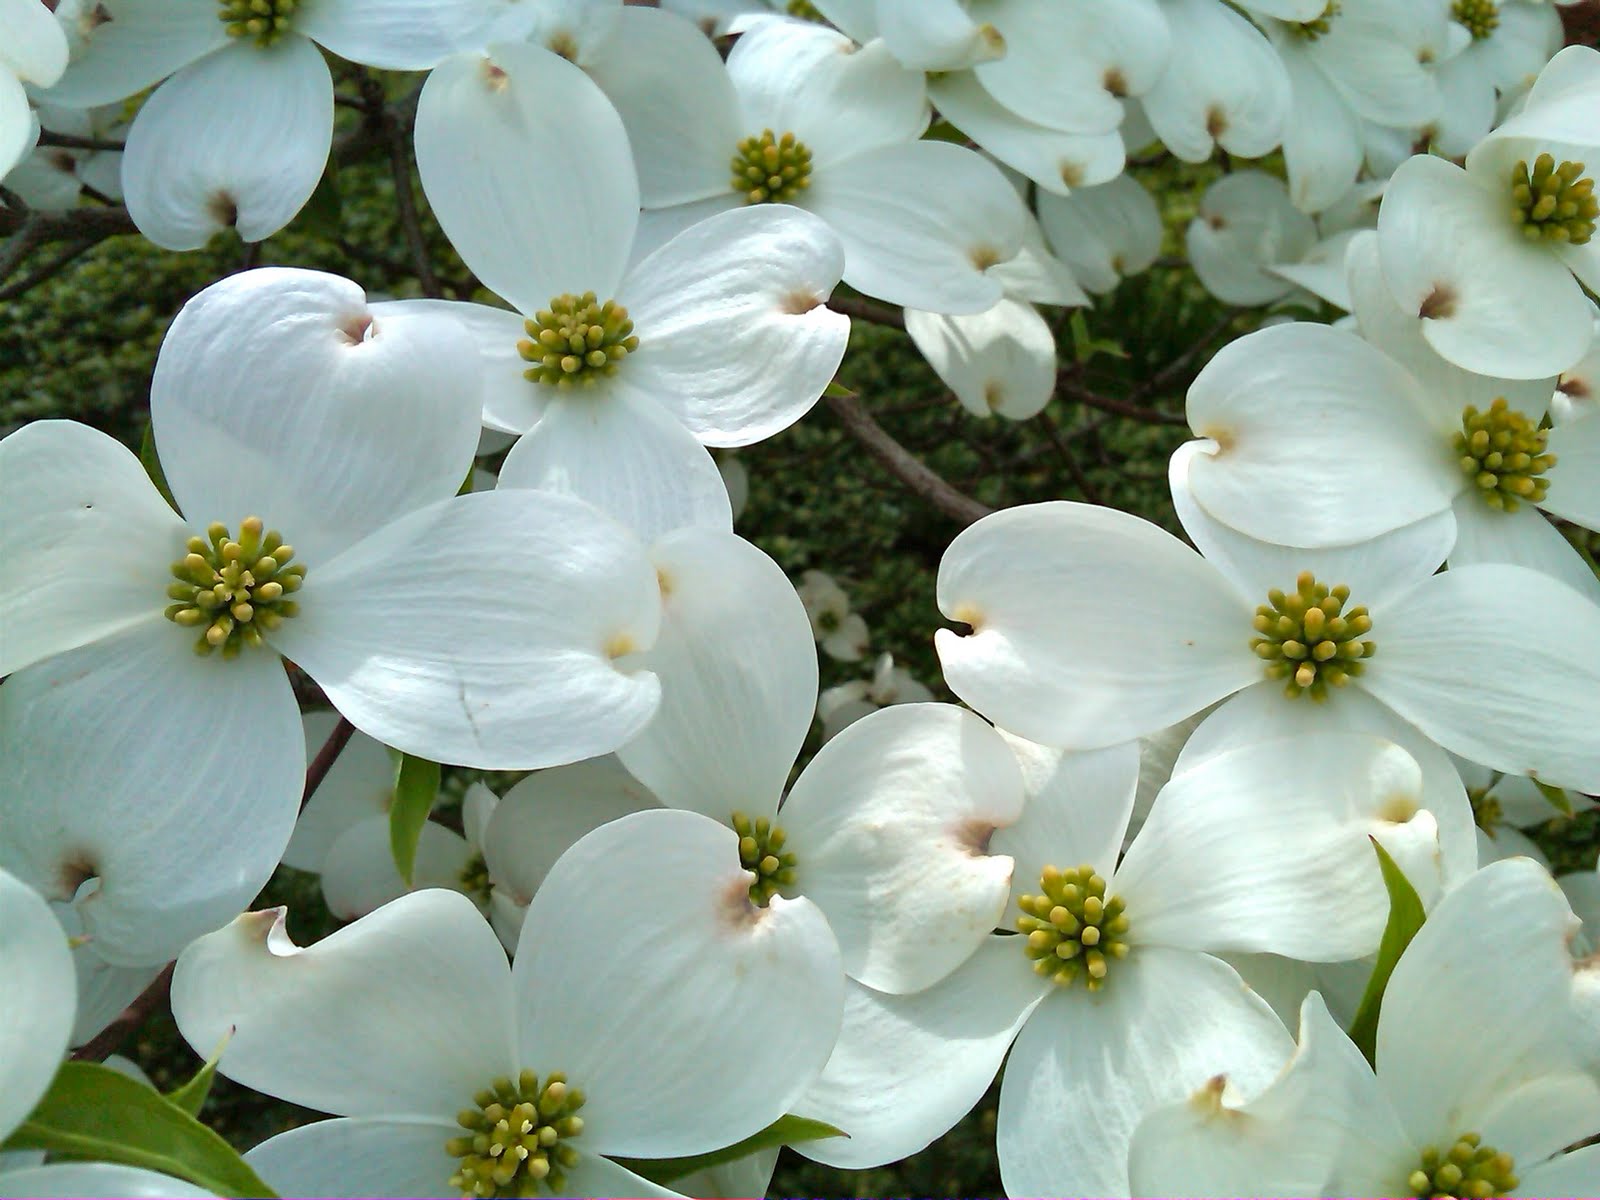 popular-state-flower-with-state-flower-of-virginia-the-american-dogwood.jpg